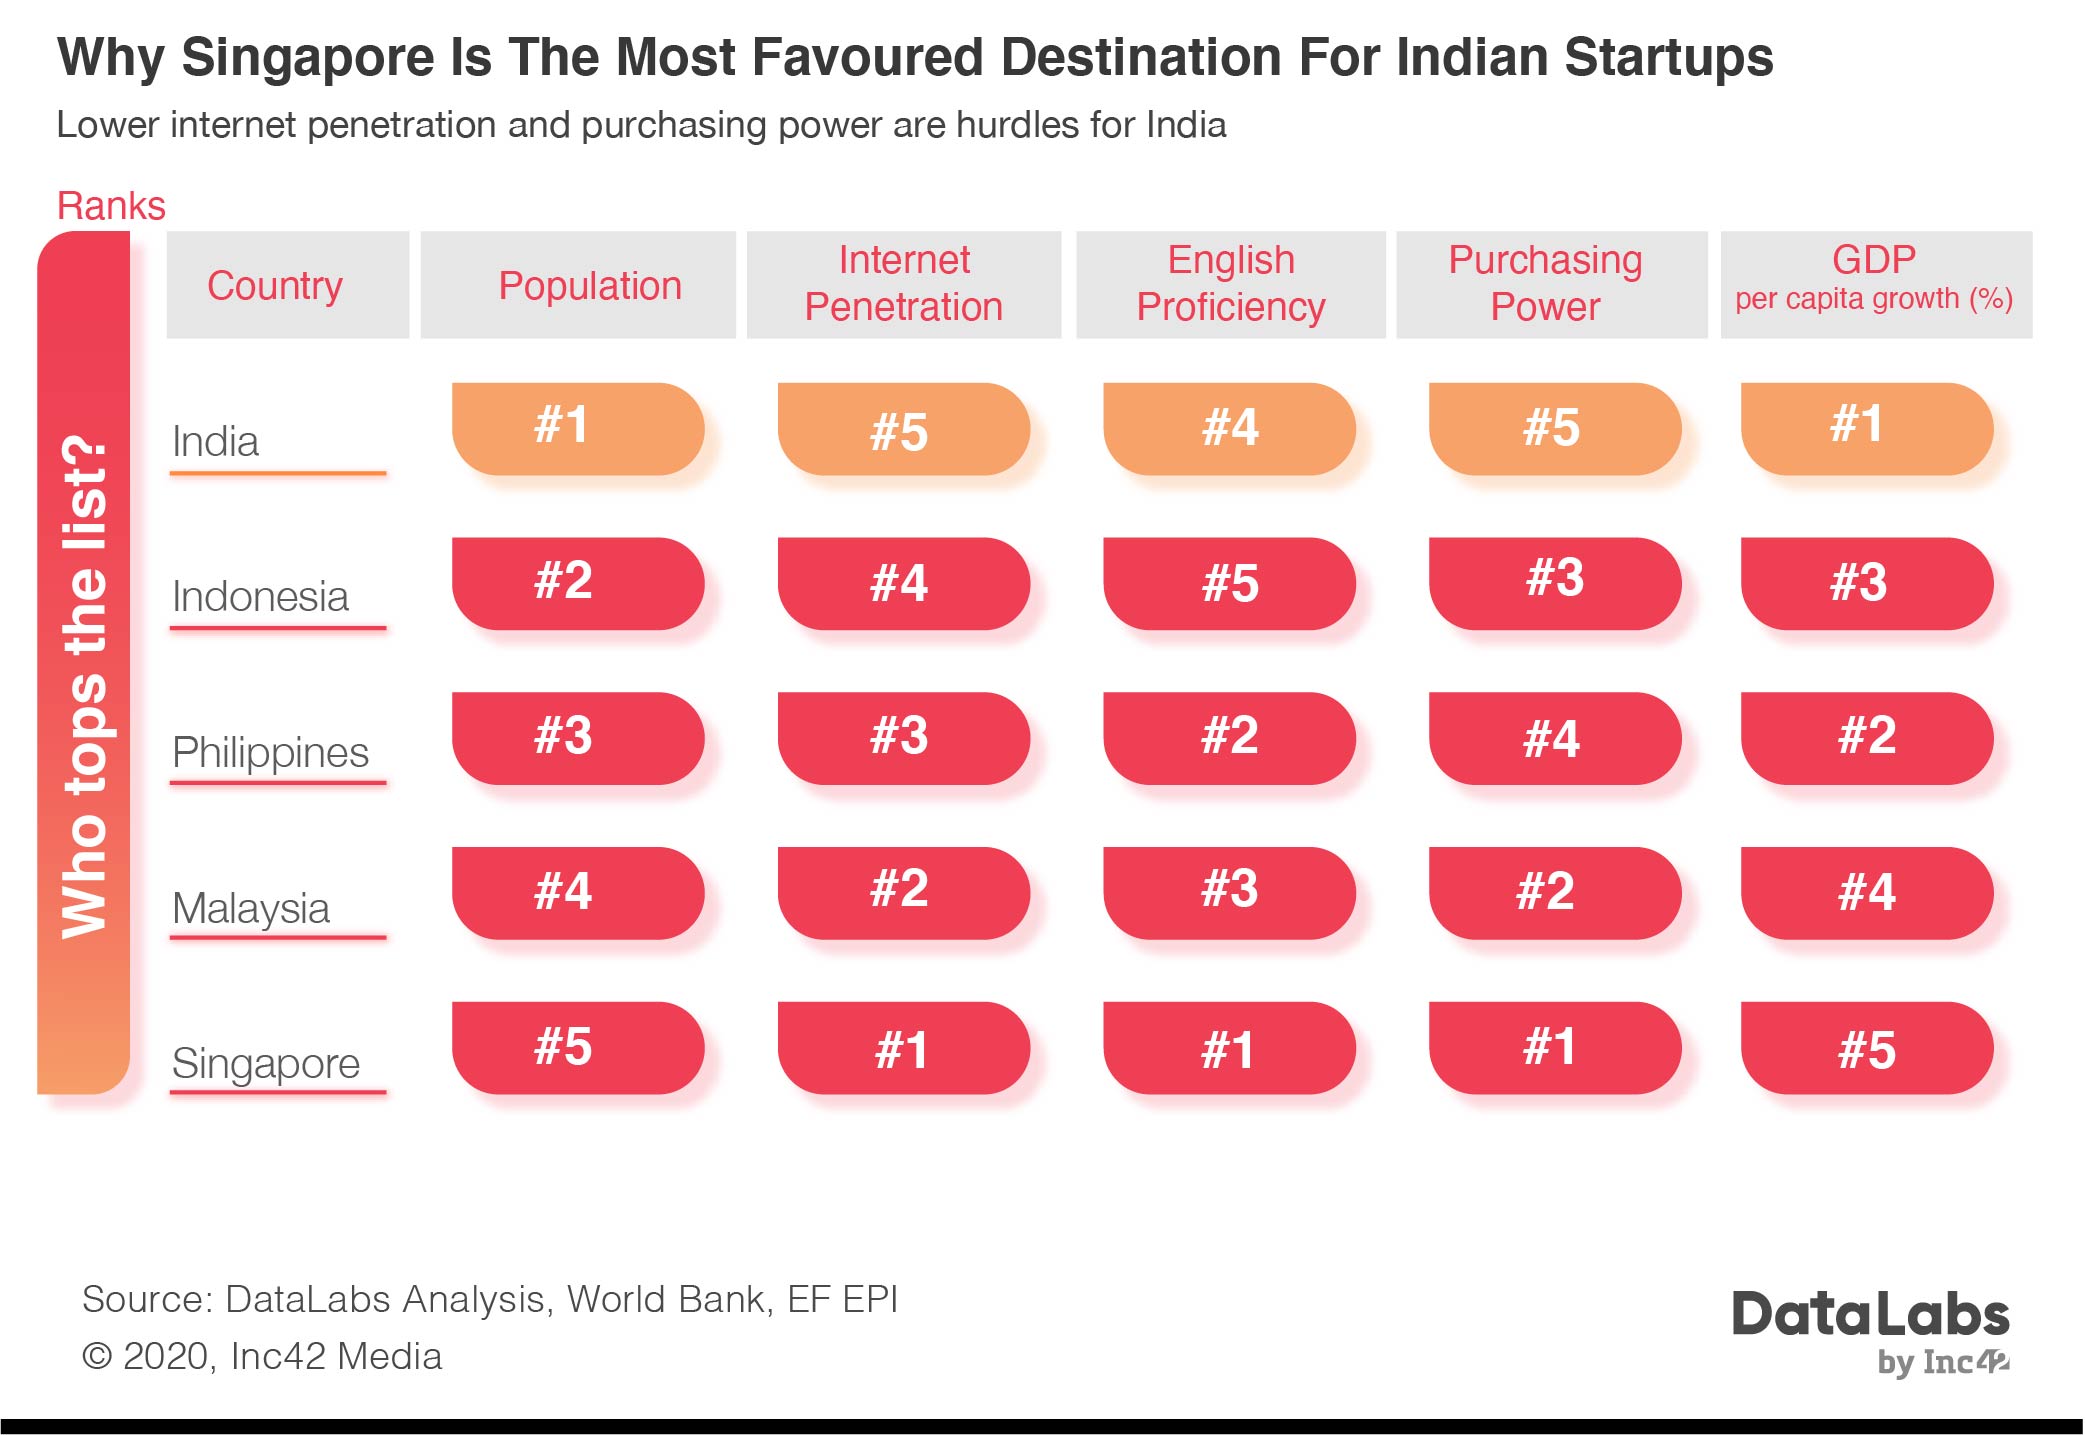 Why Singapore Is The Most Favoured Destination For Indian Startups